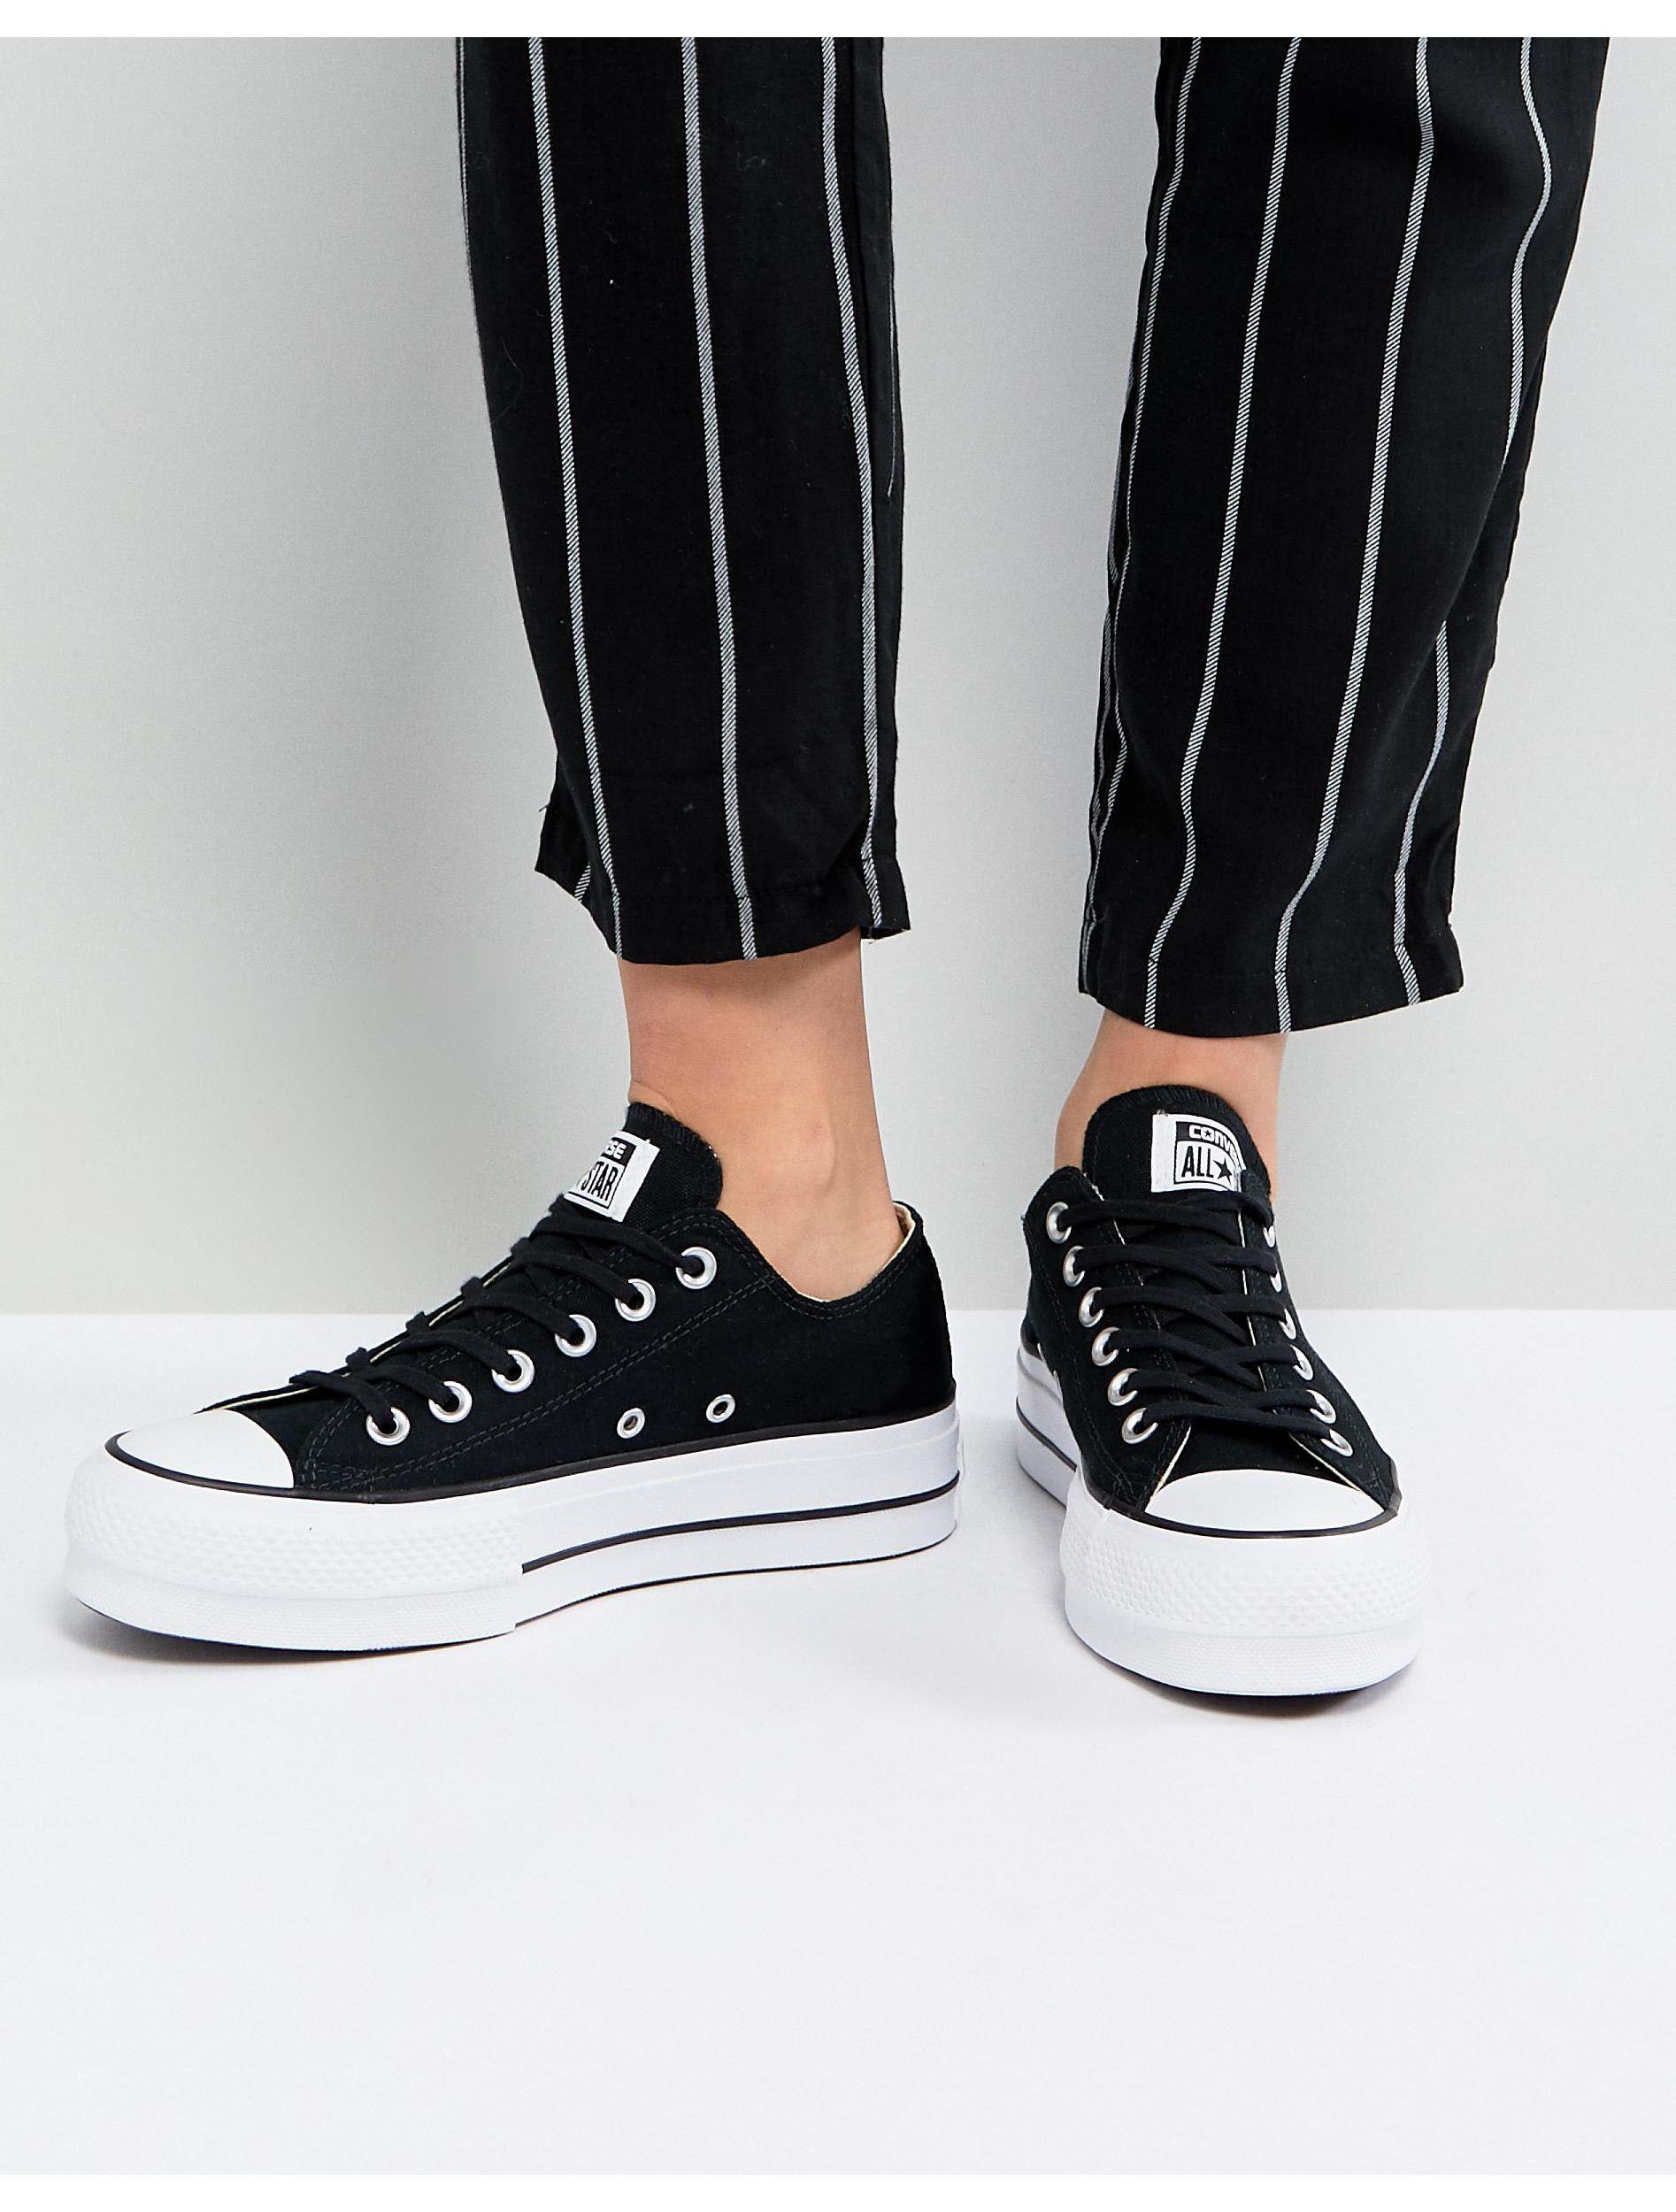 converse all star soldes plateforme blanche